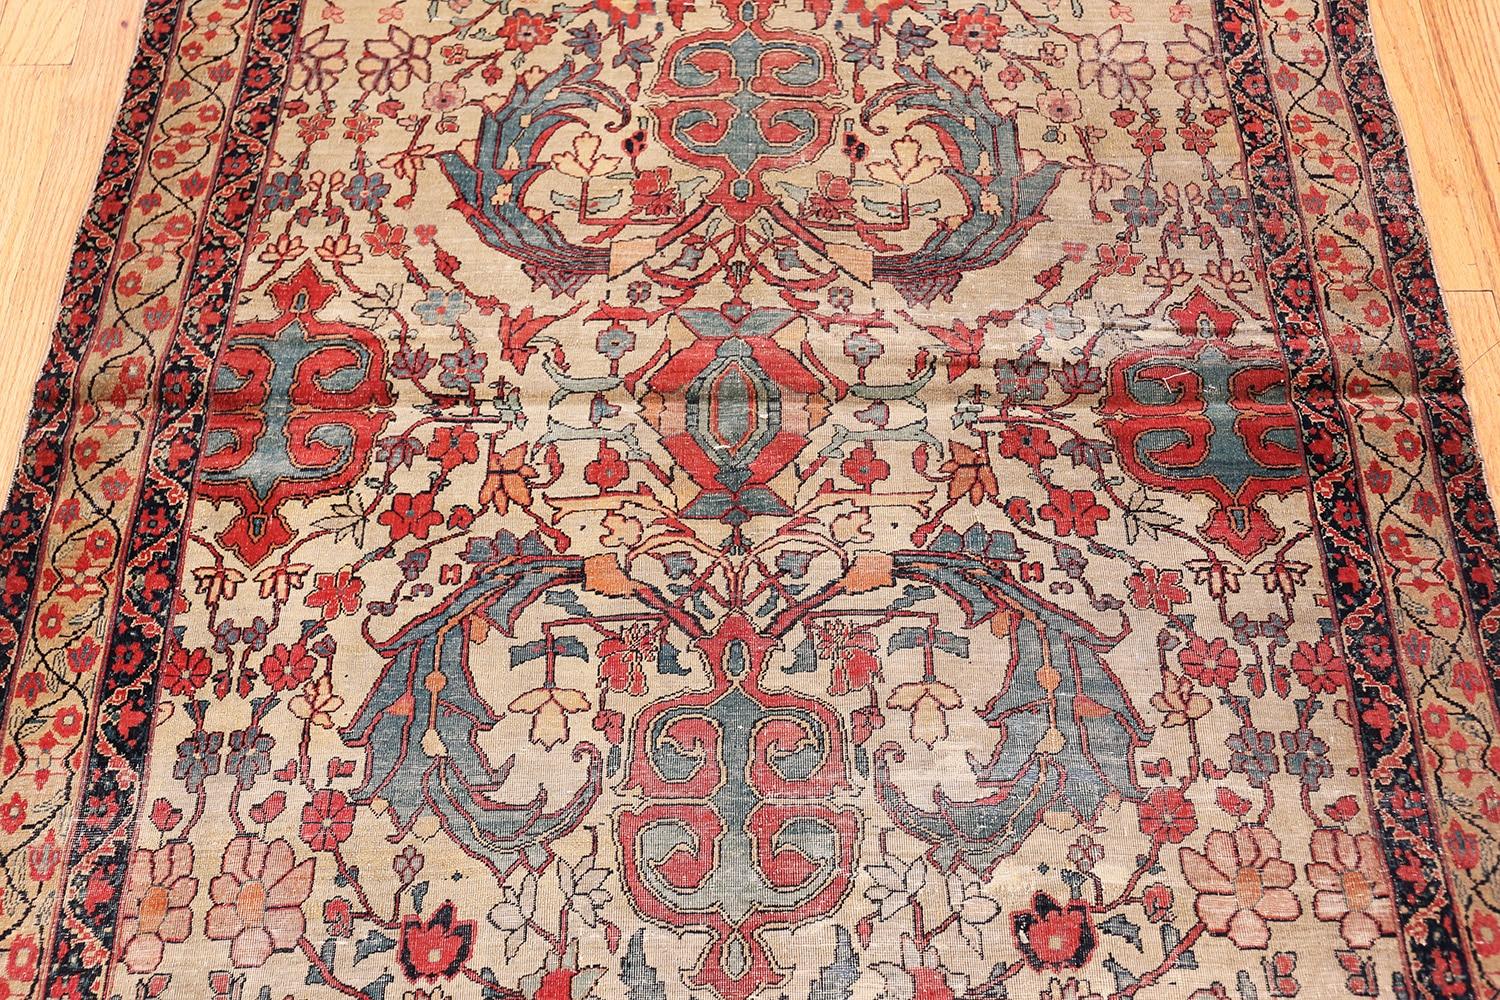 Antique shabby chic Persian Kerman rug, country of origin: Persia, date: circa late 19th century. Size: 4 ft x 6 ft 7 in (1.22 m x 2.01 m).

